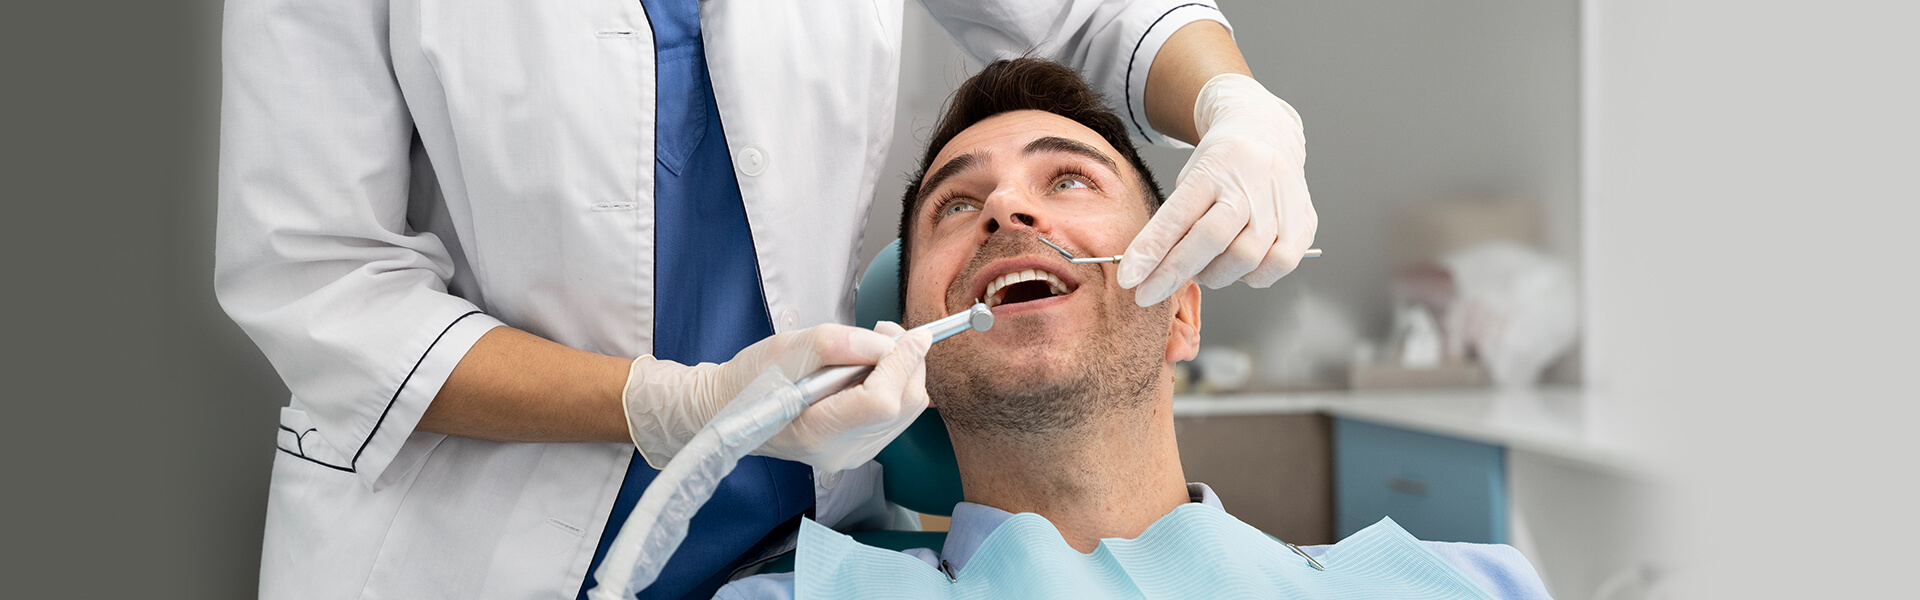 Dental Exams and Cleanings in South Lake Tahoe, CA